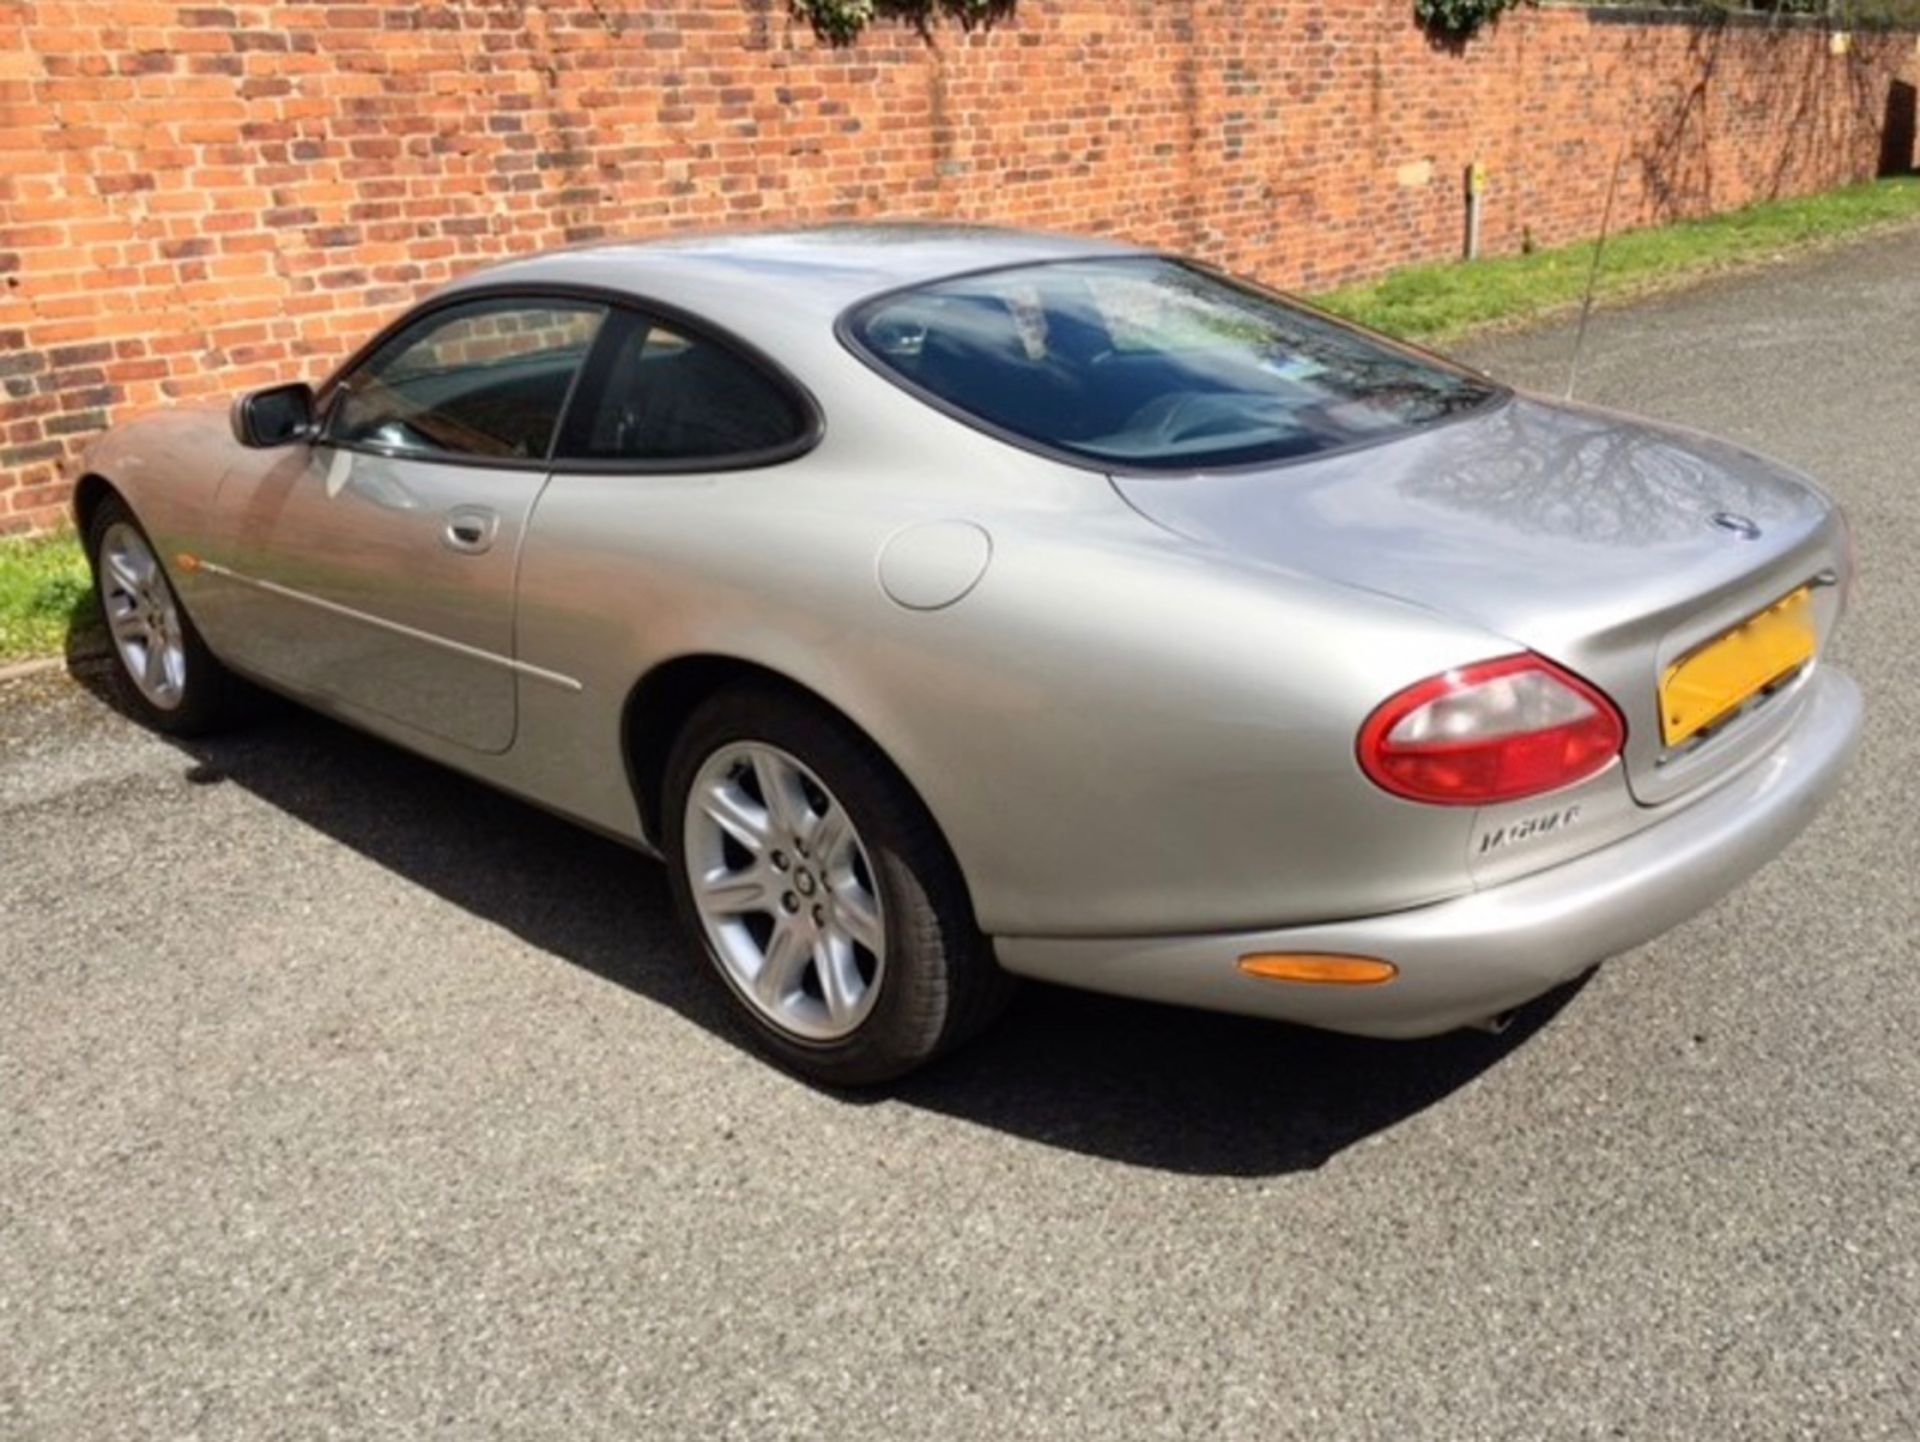 1998 Jaguar XK8 4.0 Coupe, Automatic, ***Reserve reduced, 13:40 on 11/4/17*** - Image 3 of 15